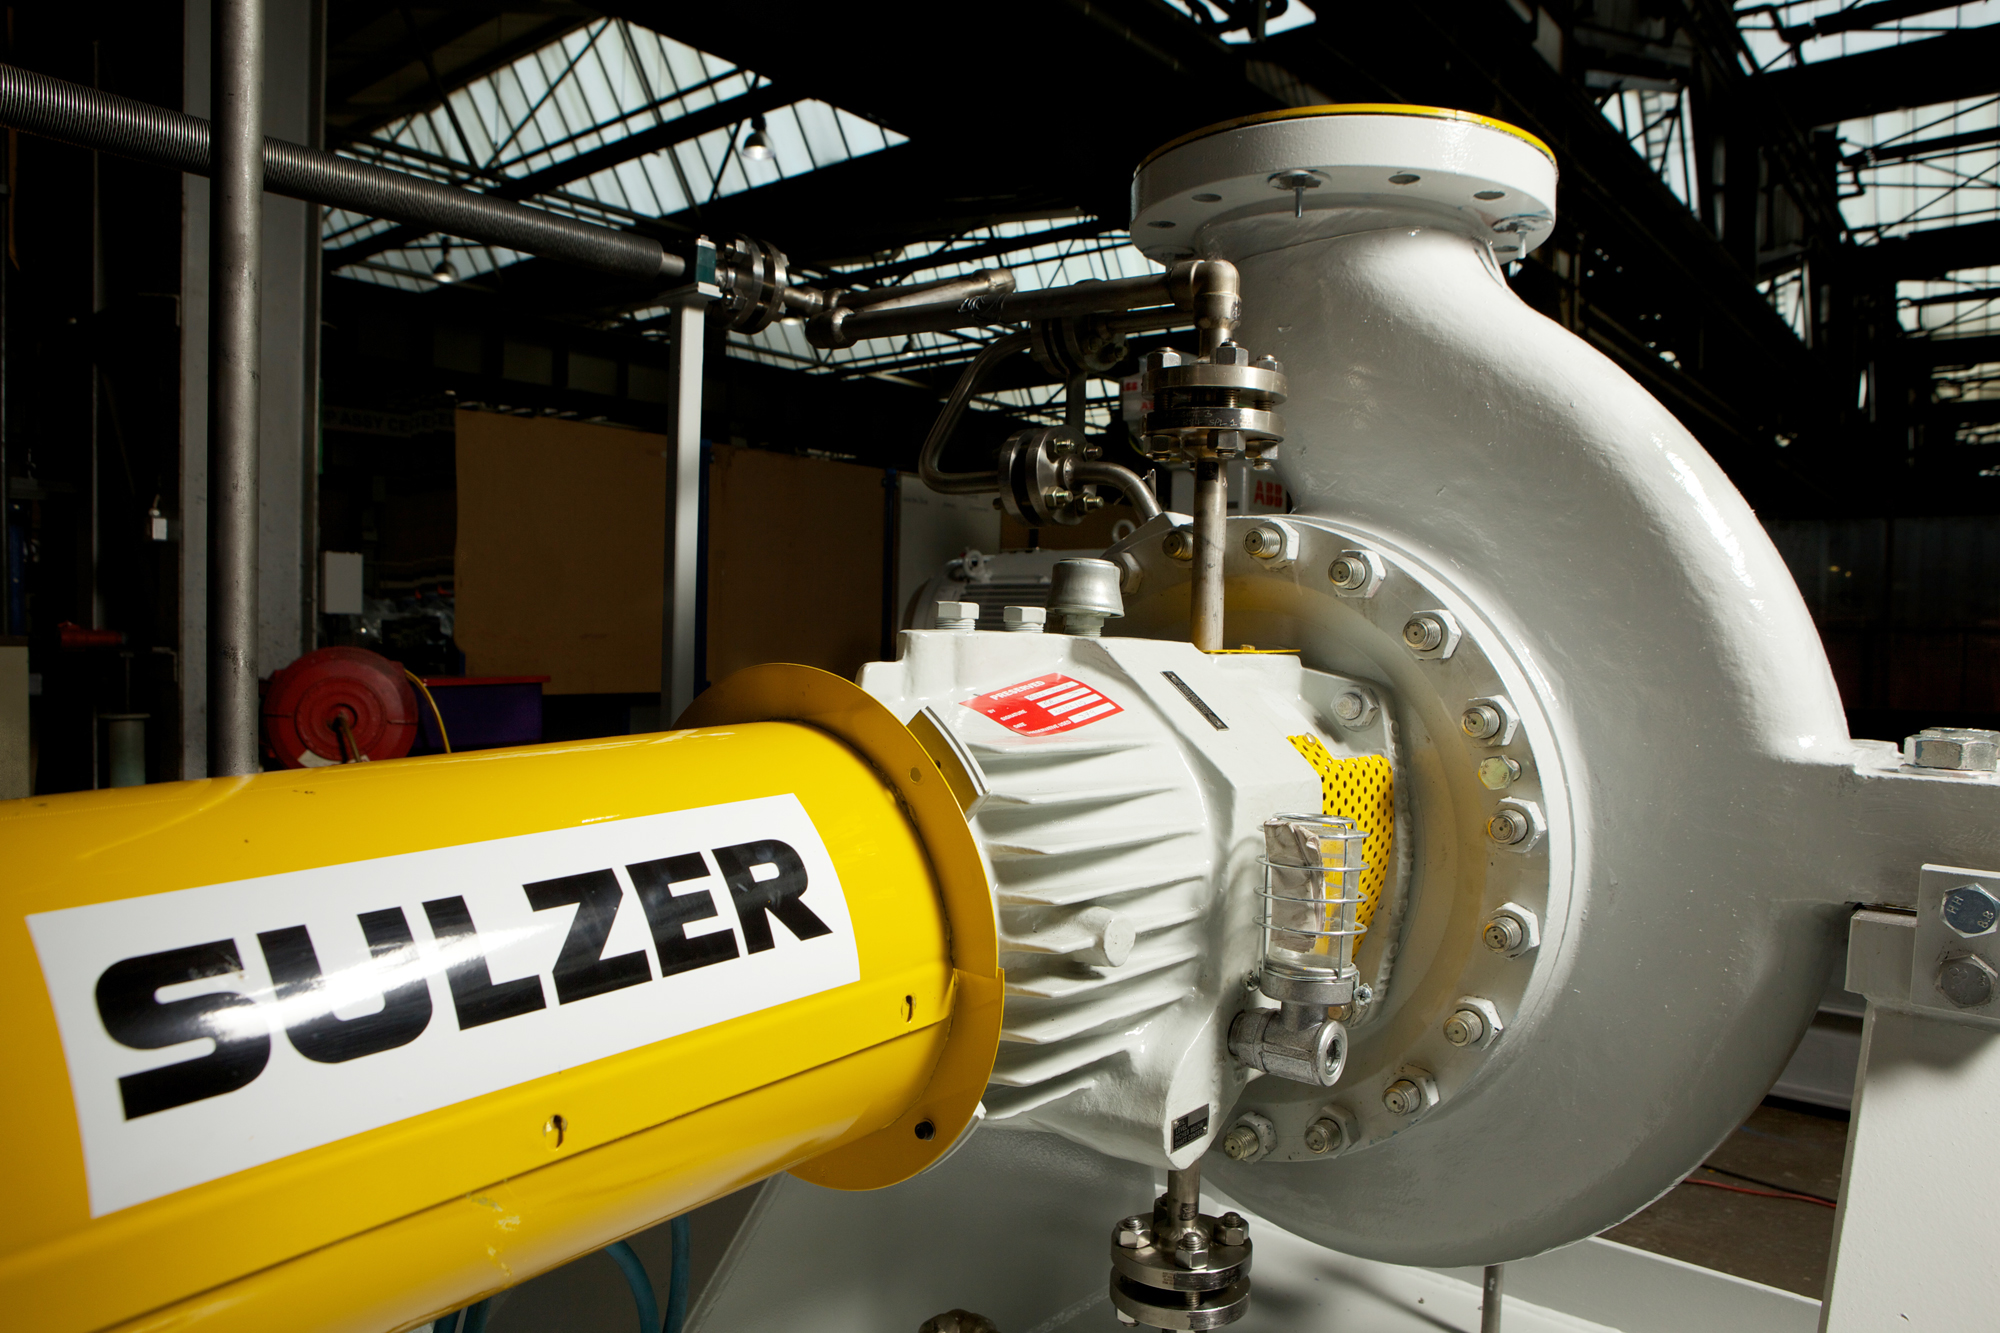 API 610 and ISO 13709 pumps | Sulzer